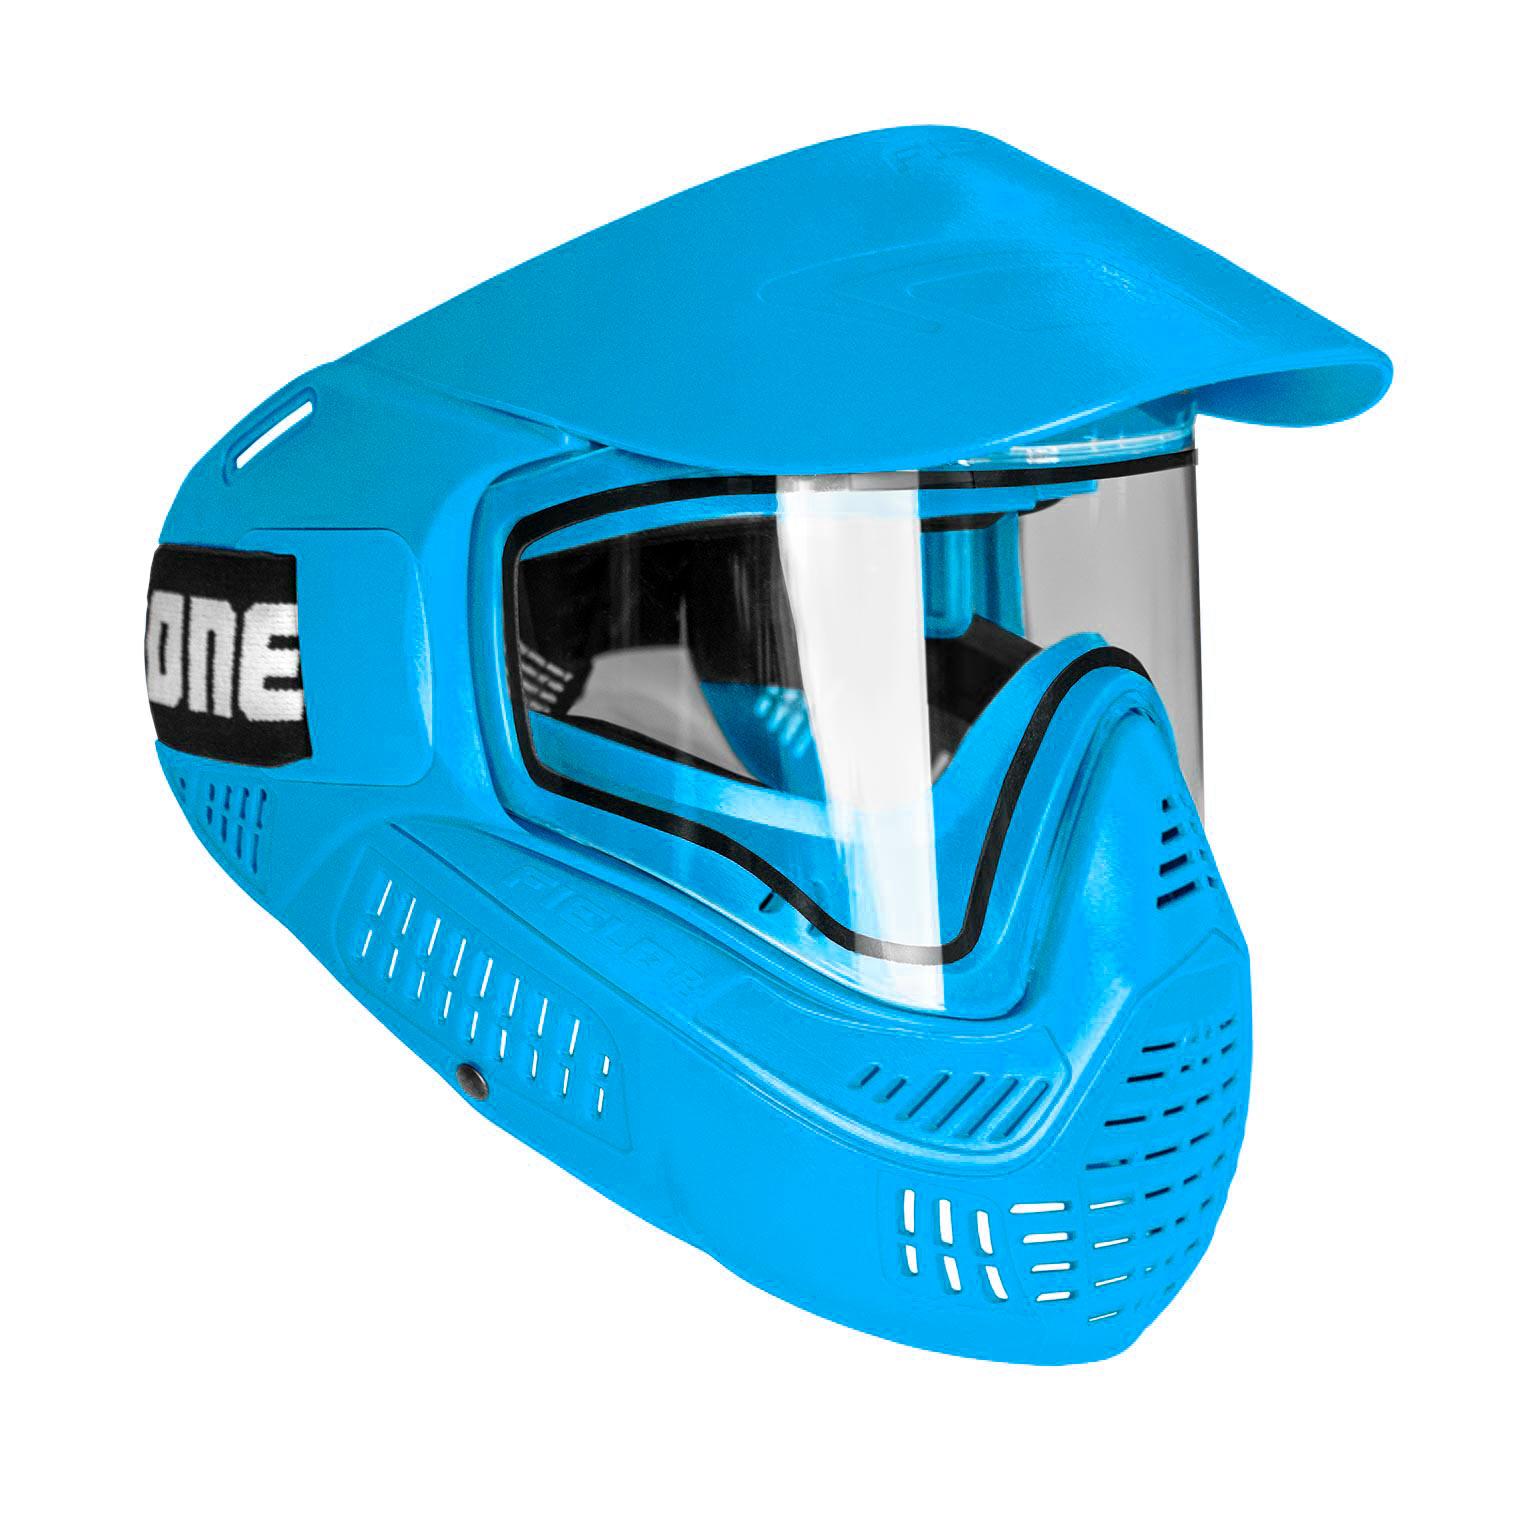 FIELDpb - ONE Goggle (Thermal Lens) - Rubber Foam - Blue